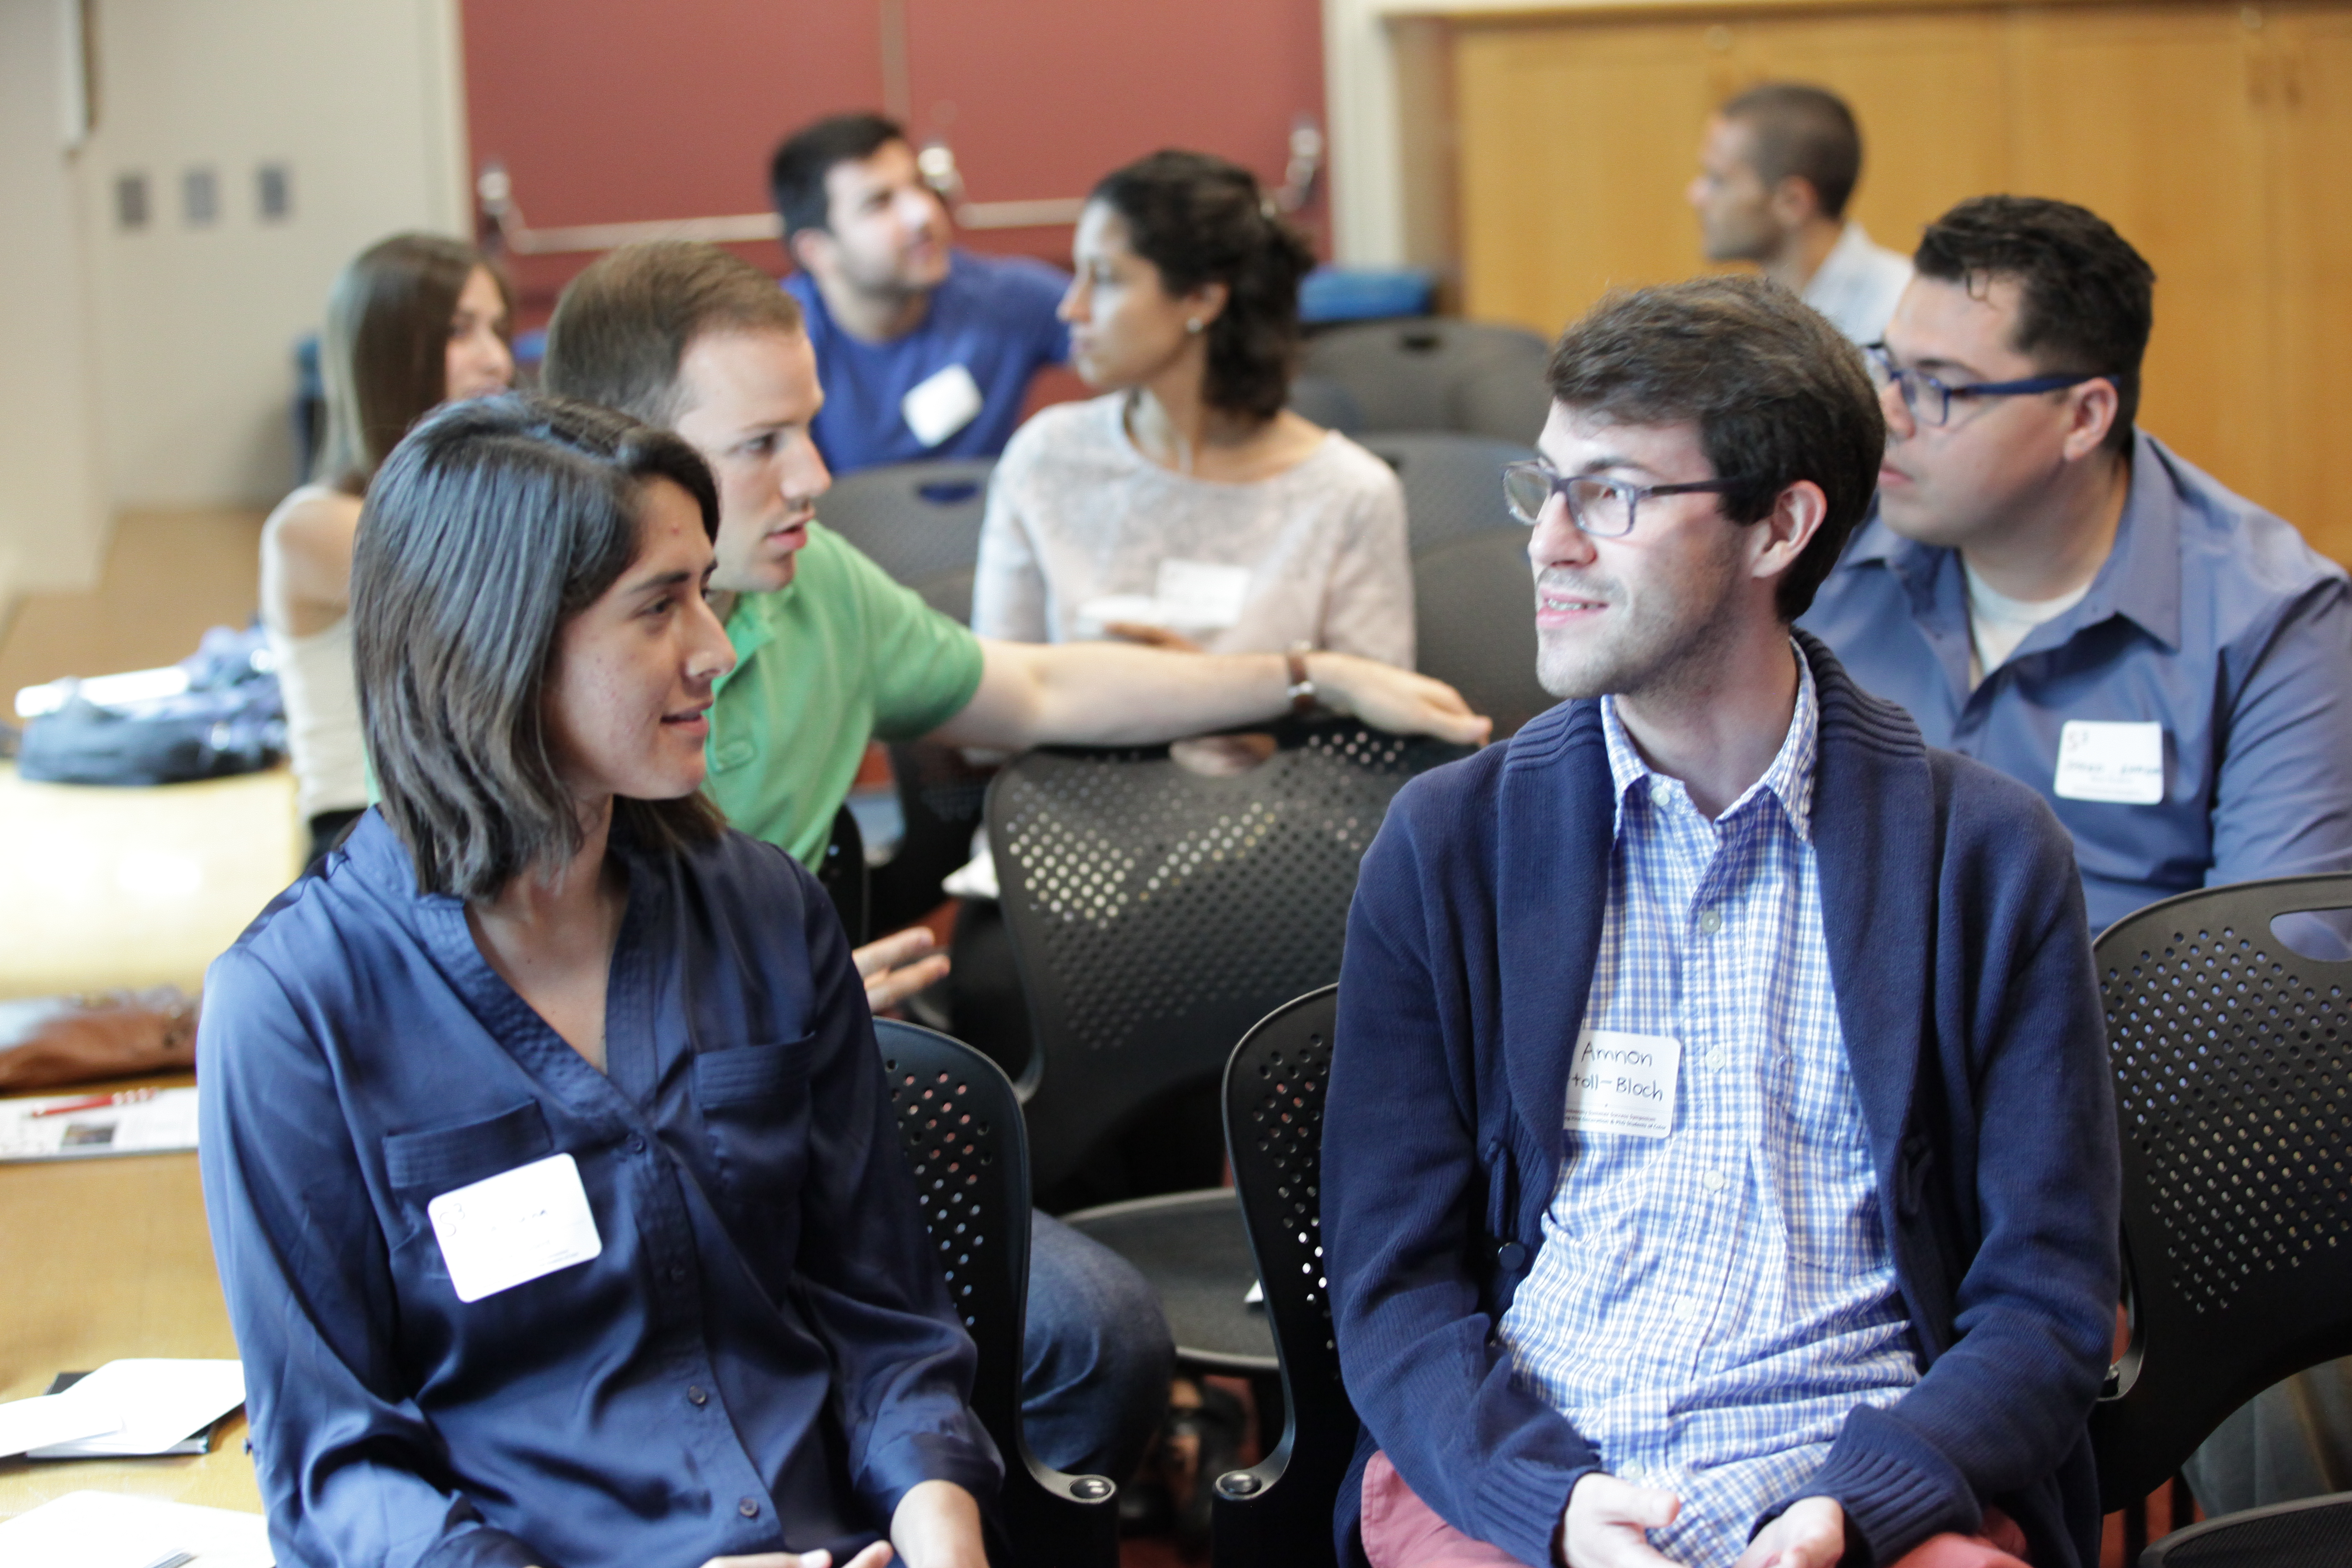 Amnon Ortoll-Bloch and a colleague engage in discussion at the Summer Success Symposium